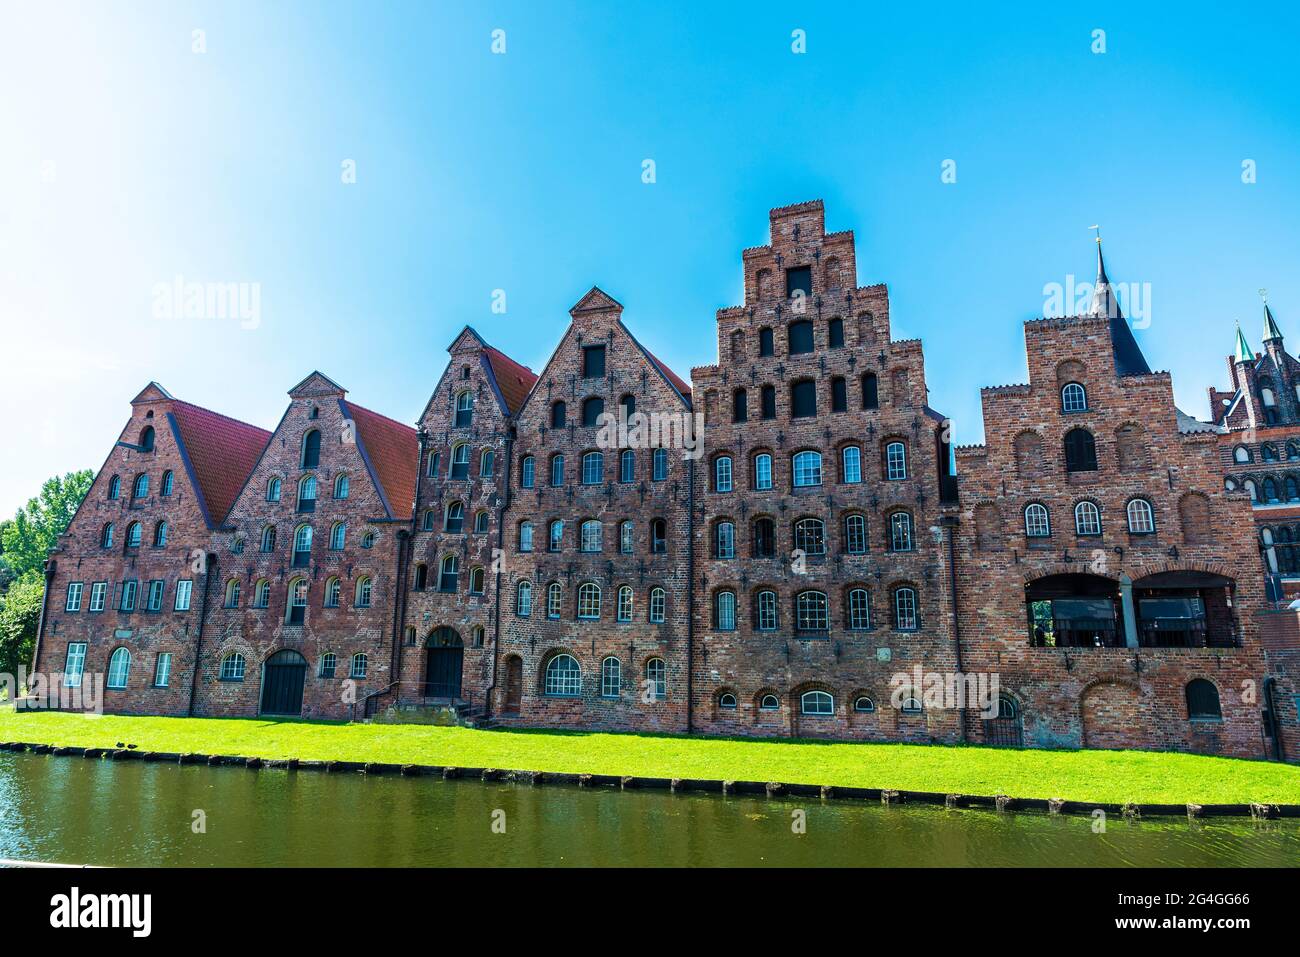 Facade of the medieval salt warehouses or Salzspeicher next to Holsten Gate or Holstentor and the river Trave in Lübeck, Germany Stock Photo